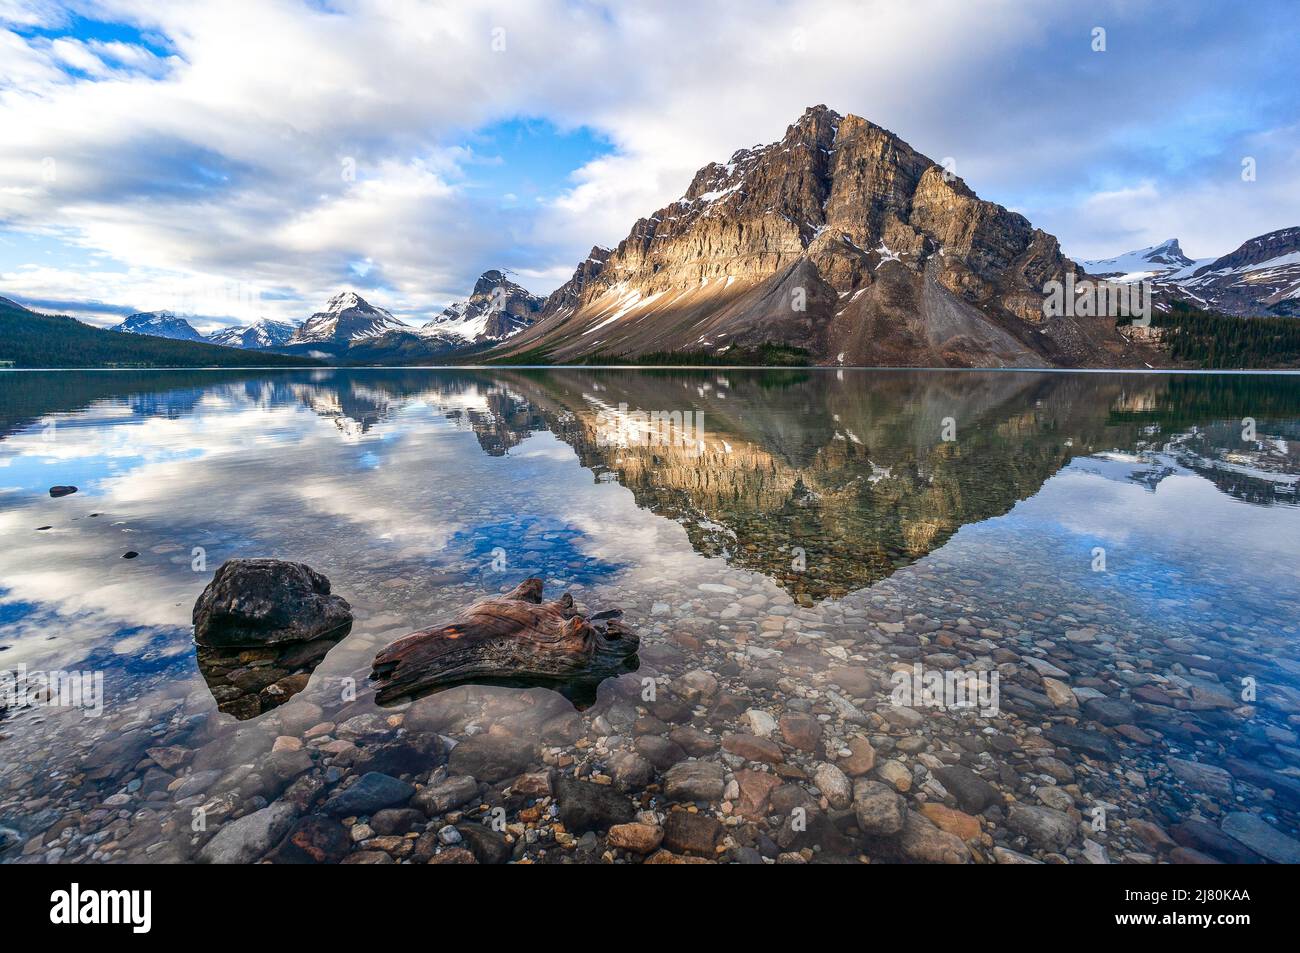 Mt Crowfoot Reflection, lac Bow, Rocheuses canadiennes, parc national Banff, Alberta, Canada Banque D'Images